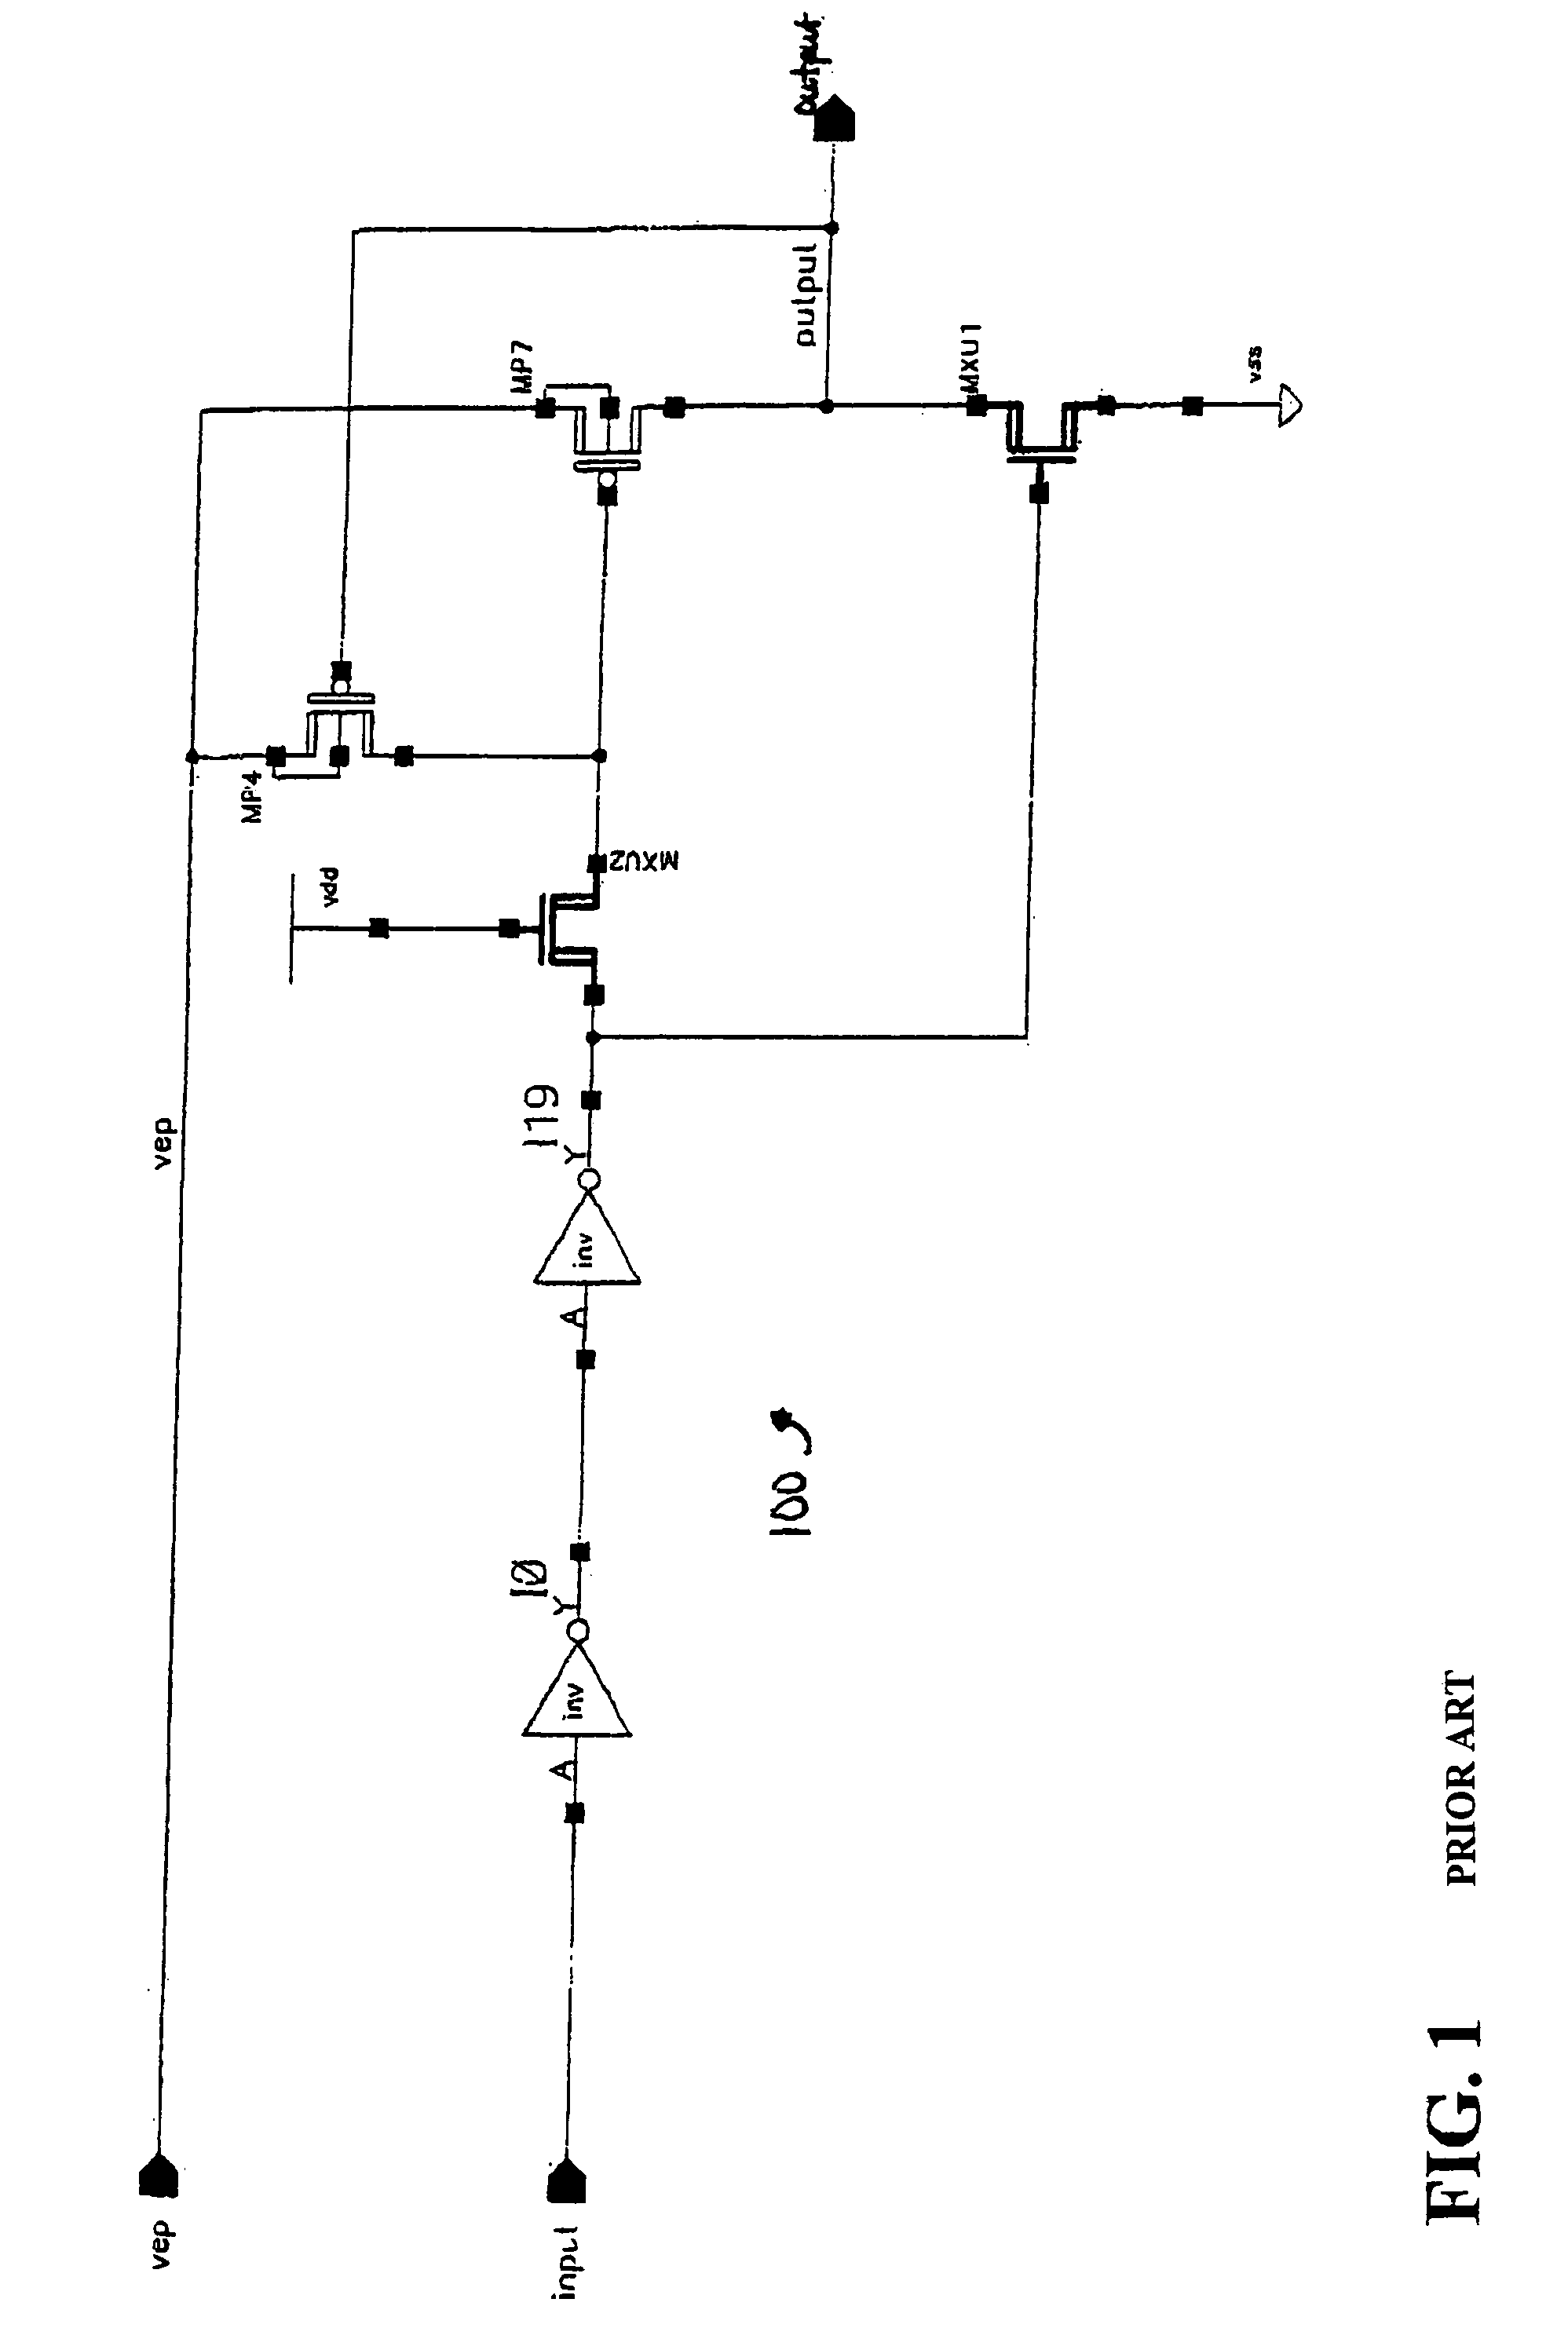 Method and apparatus for avoiding gated diode breakdown in transistor circuits